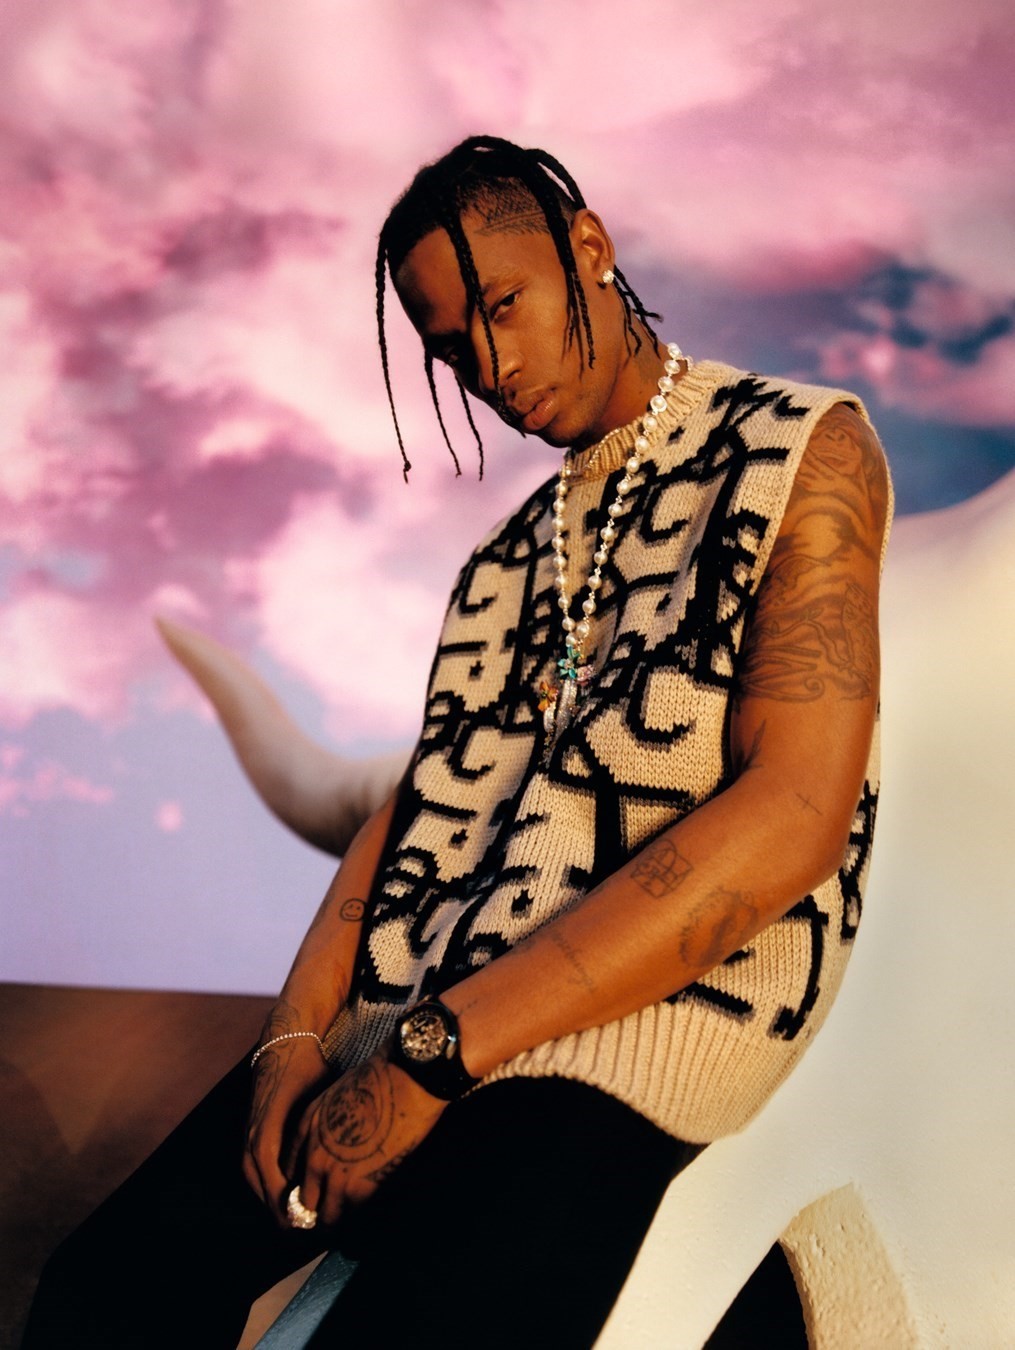 Travis Scott wanted by NYPD after an alleged assault in a nightclub